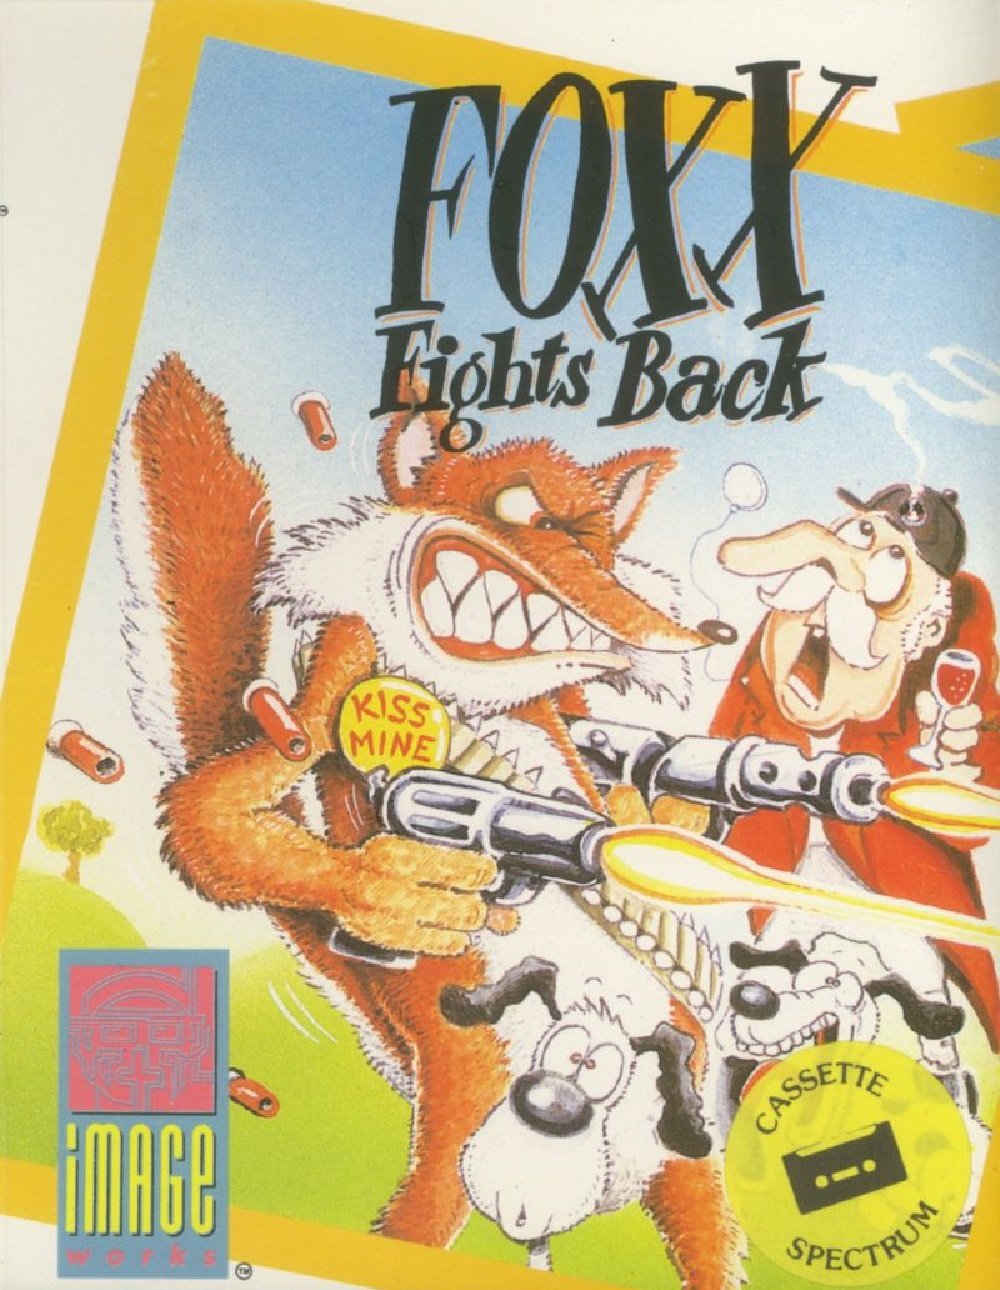 Image of Foxx Fights Back